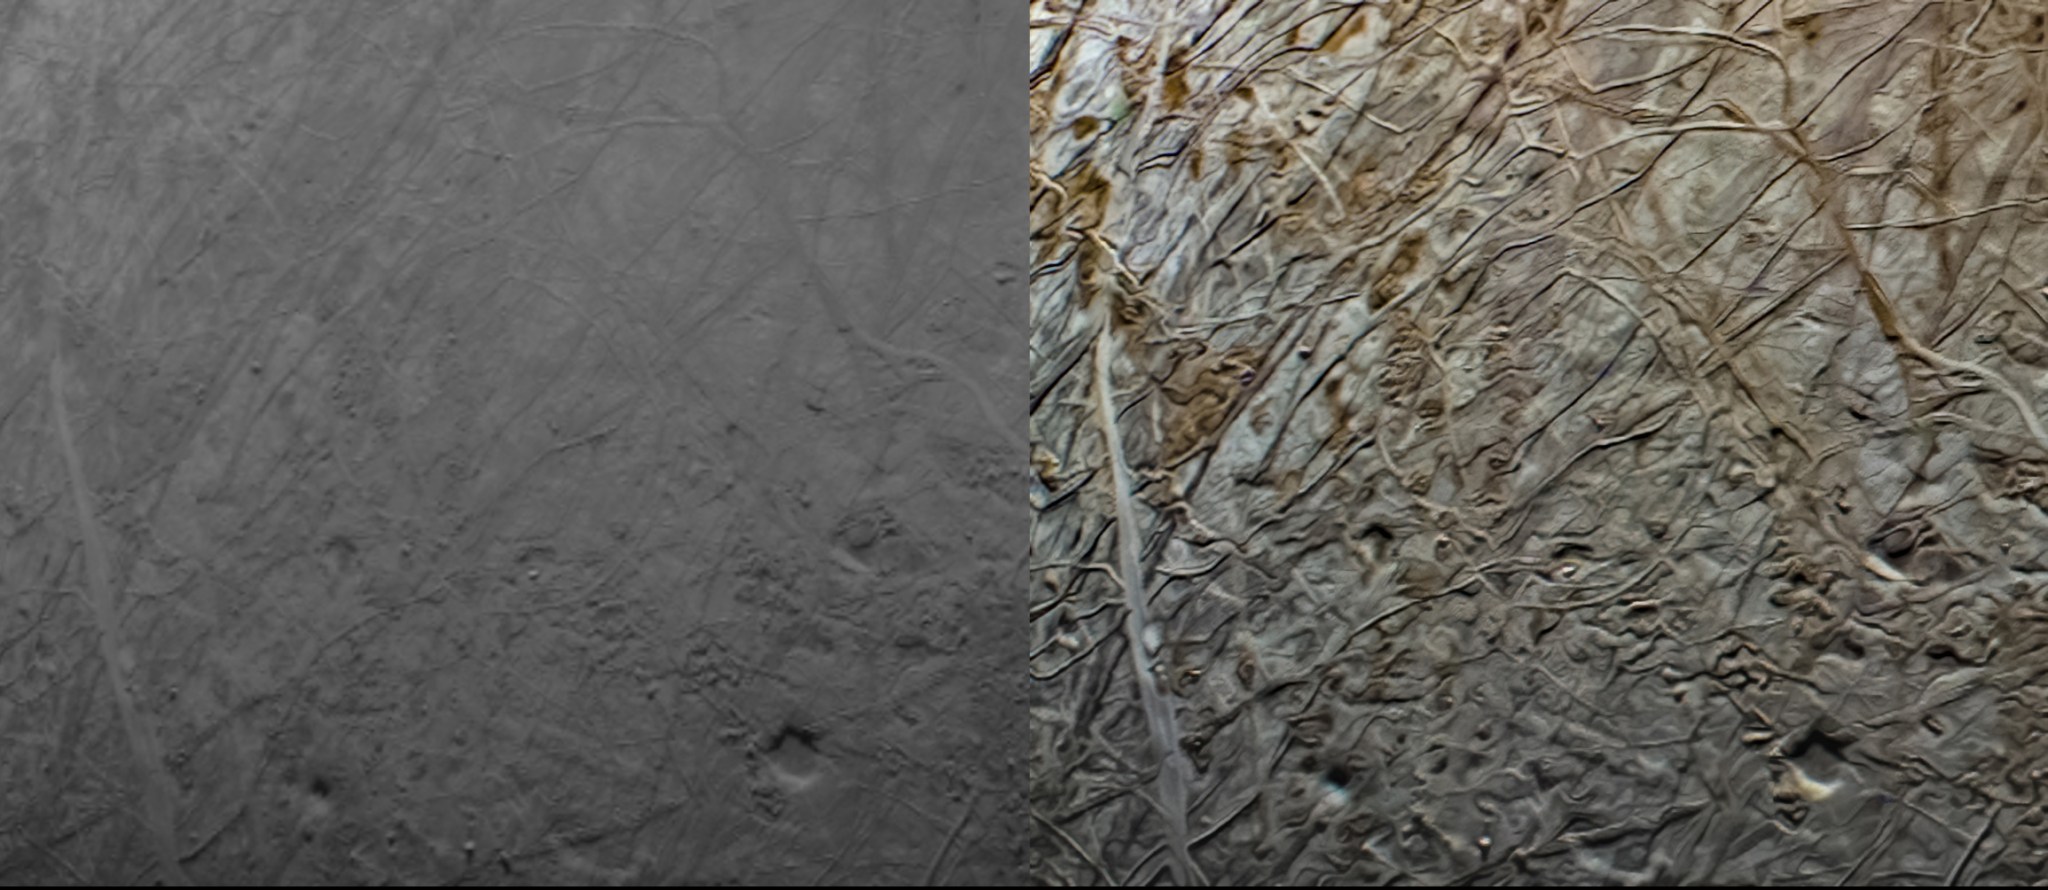 This pair of images shows the same portion of Europa as captured by the Juno spacecraft’s JunoCam during the mission’s Sept. 29 close flyby. 